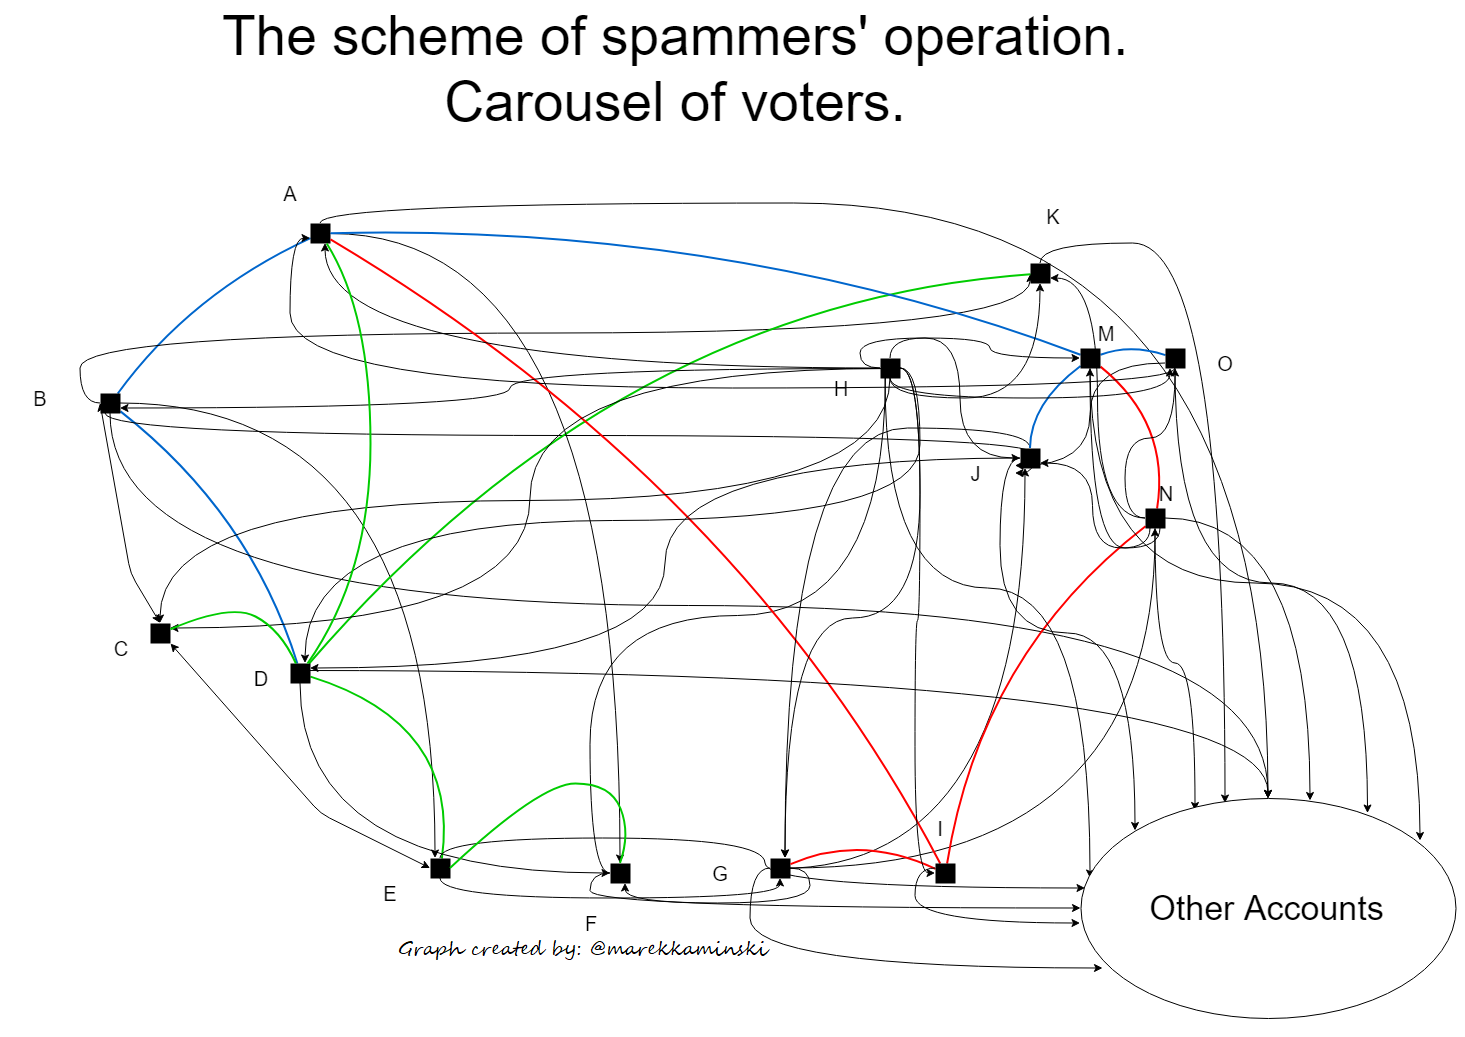 Scheme of spammer accounts.png